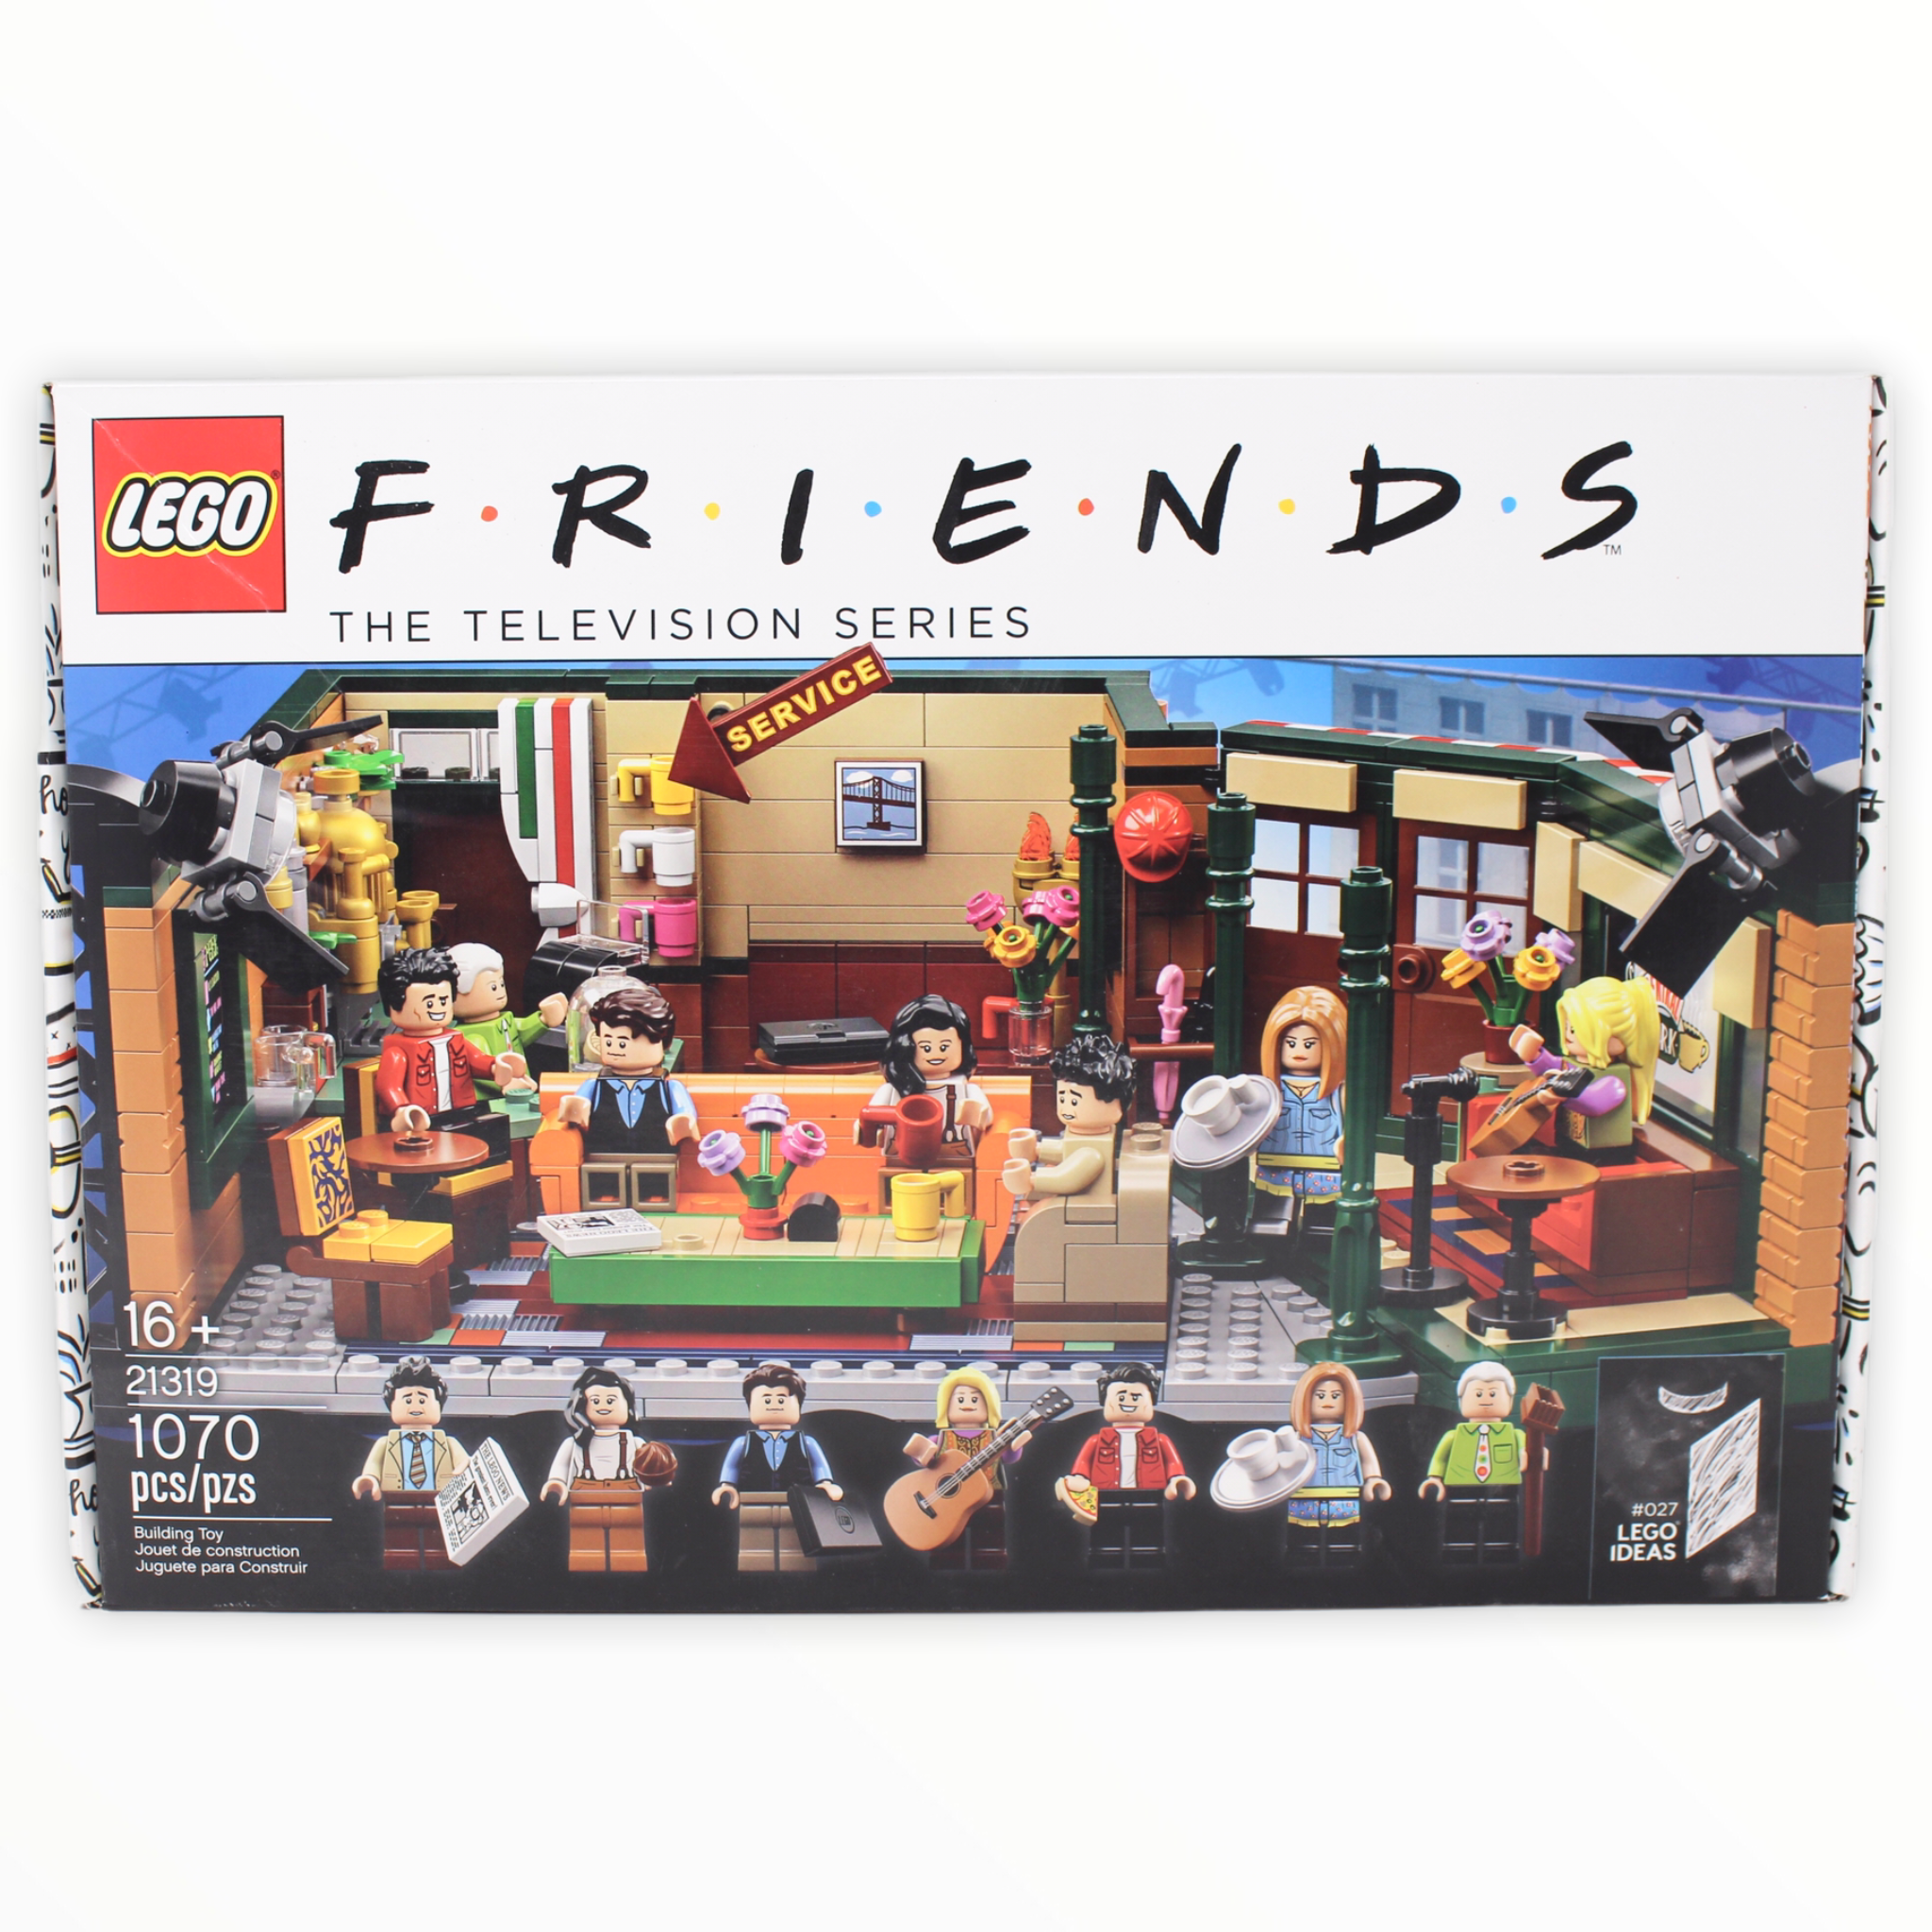 Certified Used Set 21319 LEGO Ideas F.R.I.E.N.D.S Central Perk